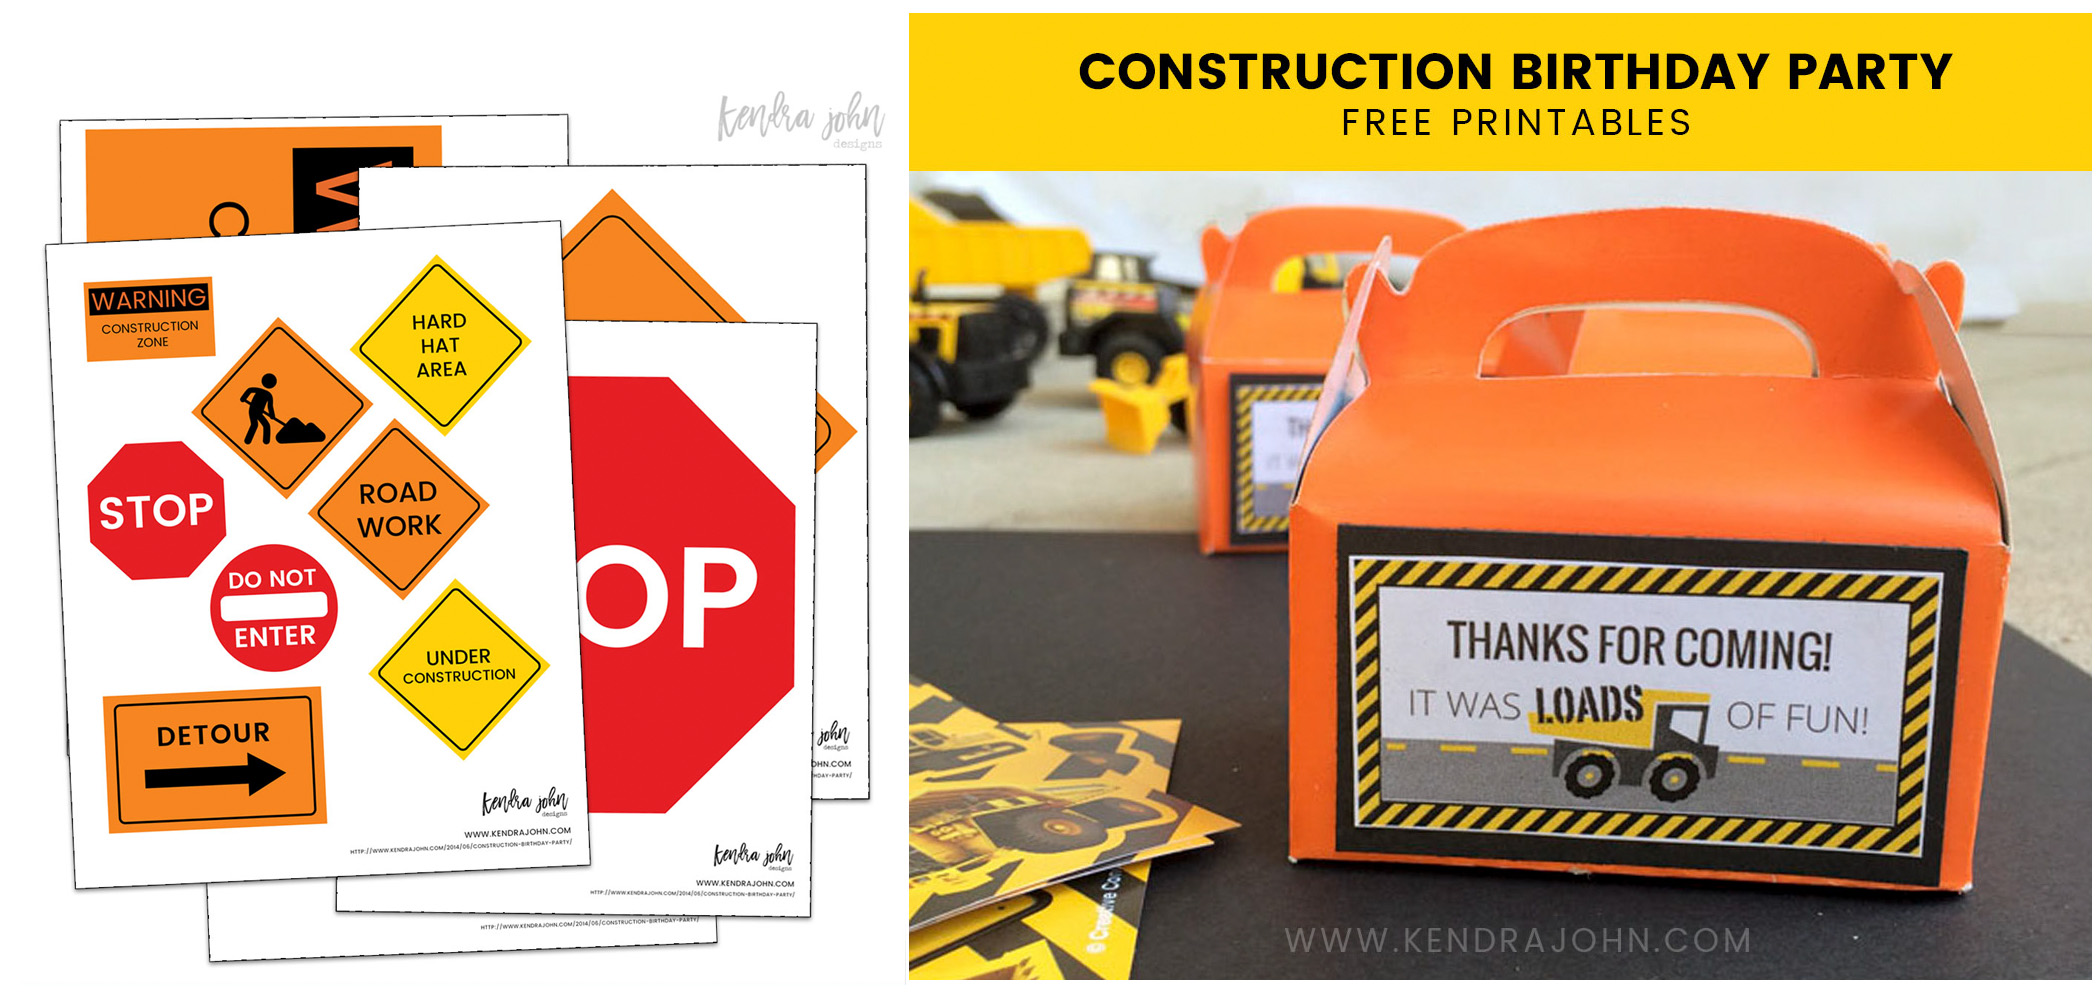 construction-birthday-party-poster-sign-printed-dig-in-etsy